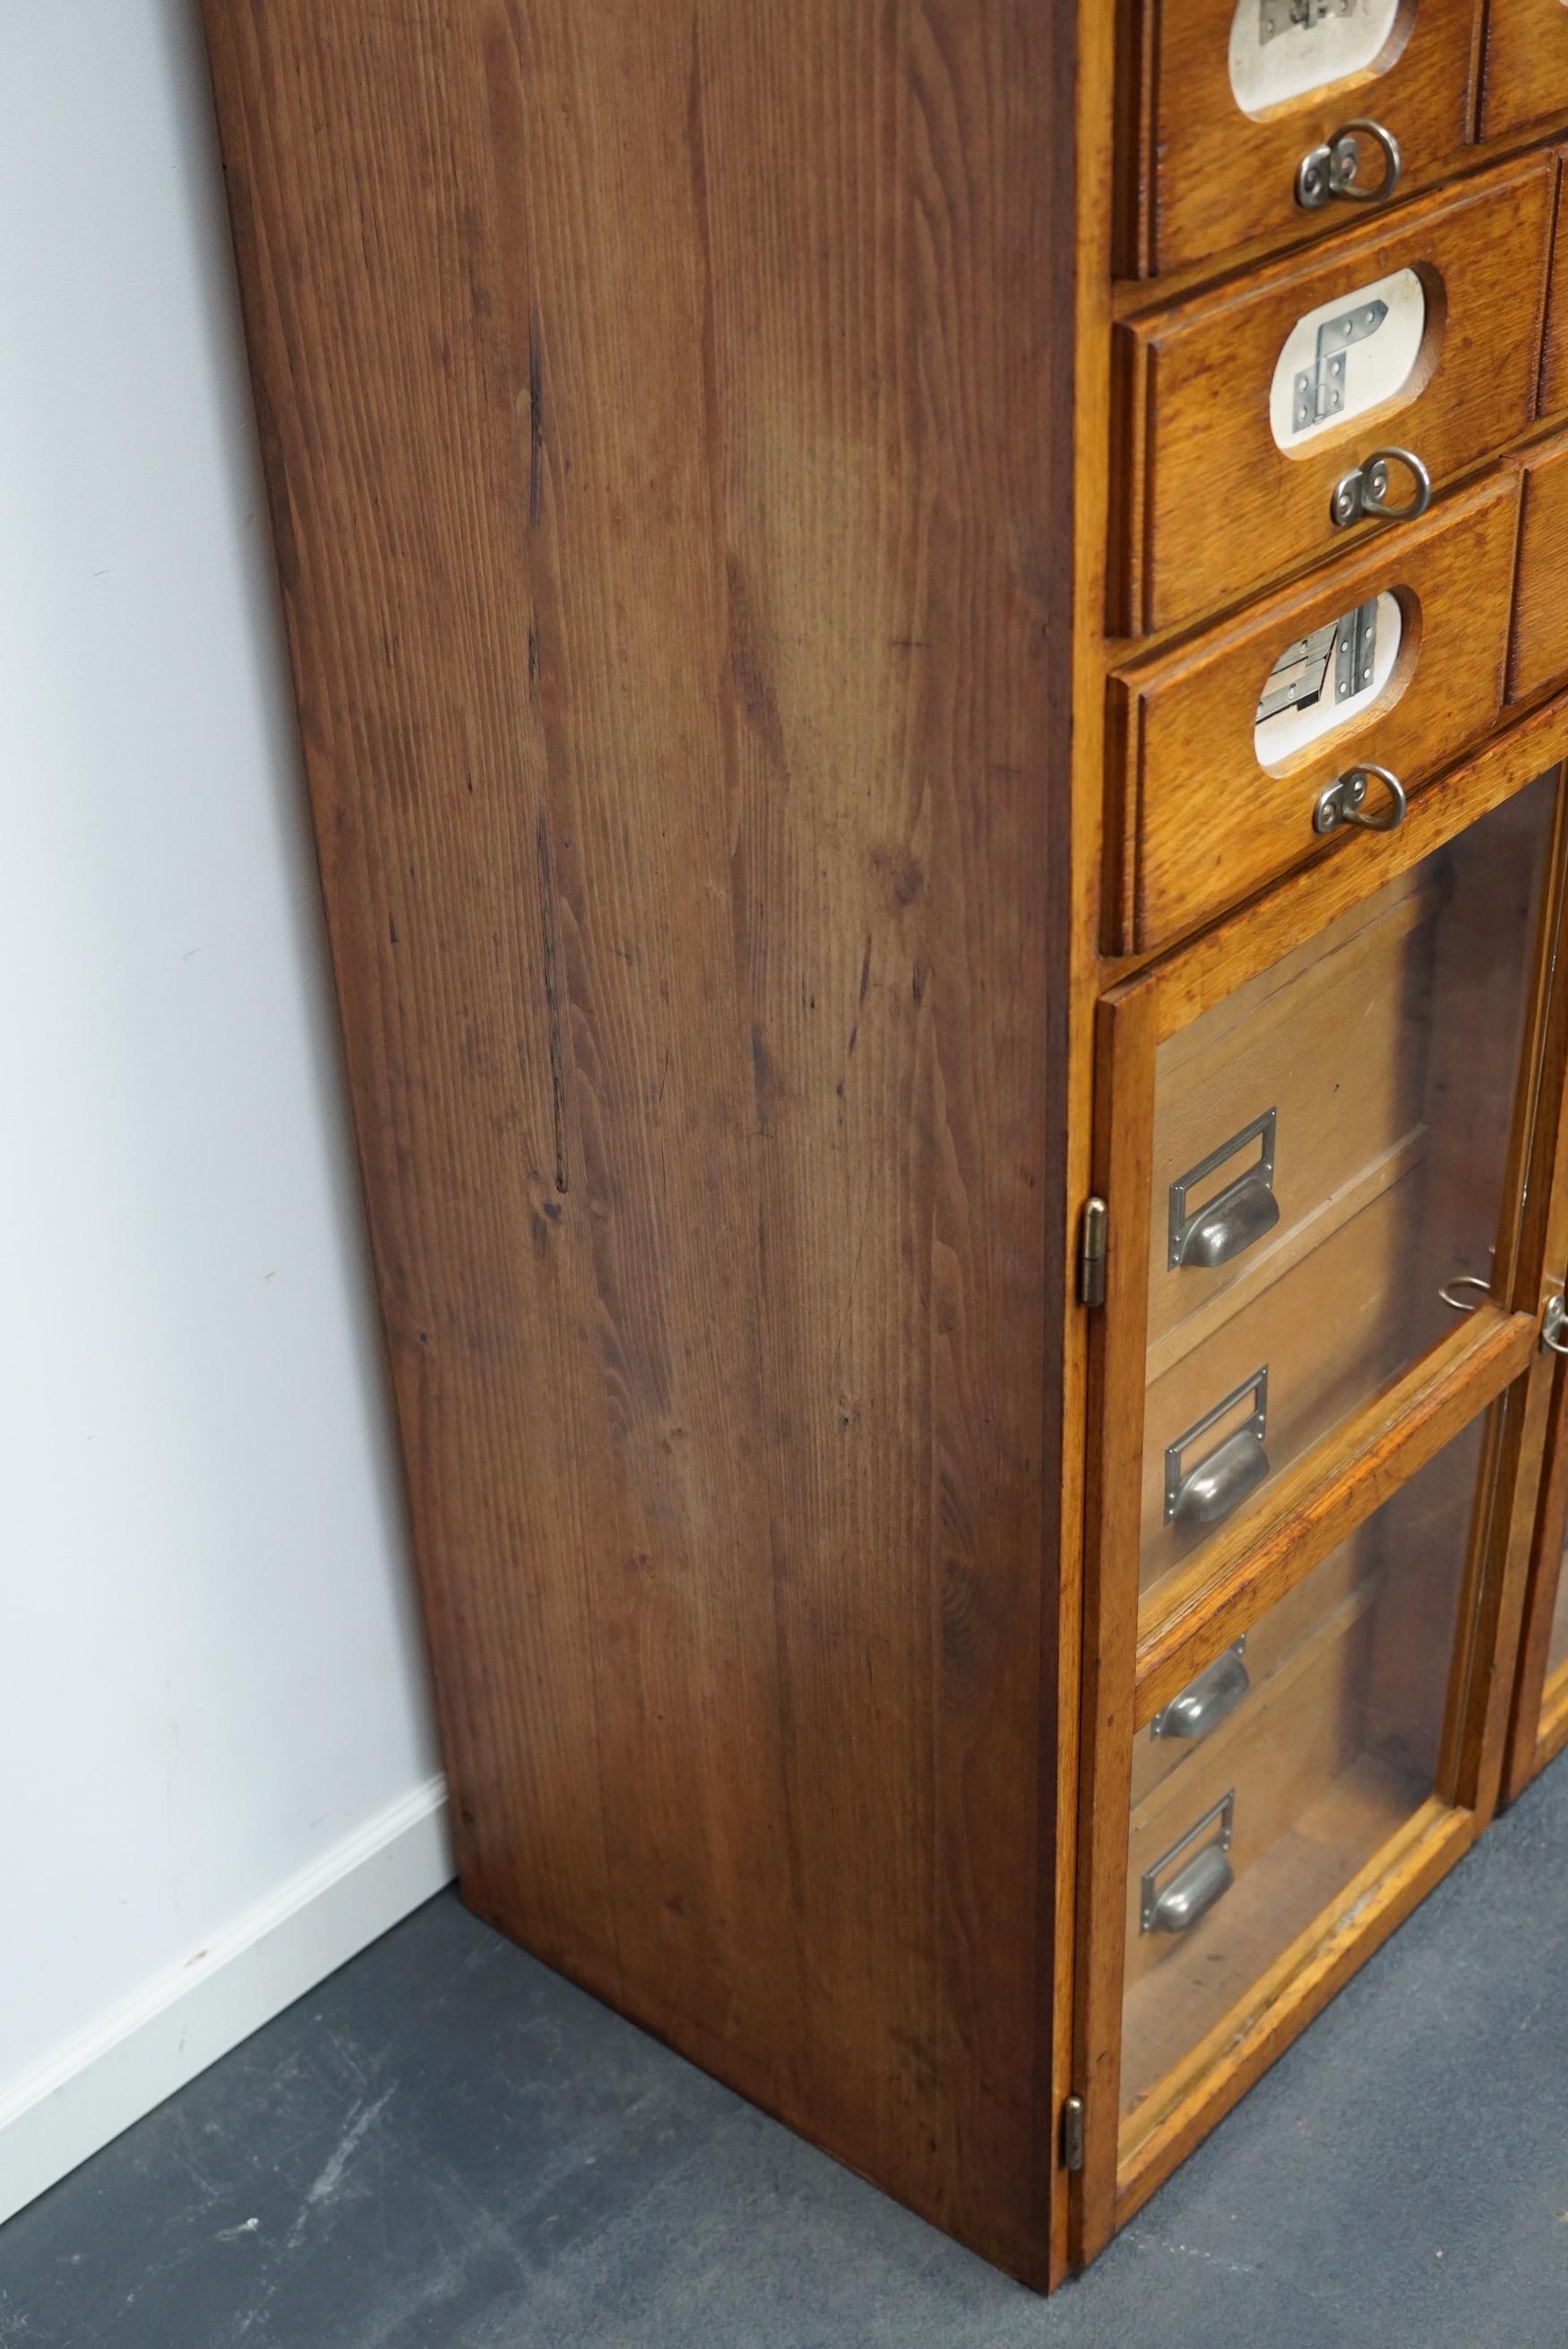 German Industrial Oak and Pine Apothecary Cabinet, Mid-20th Century For Sale 9